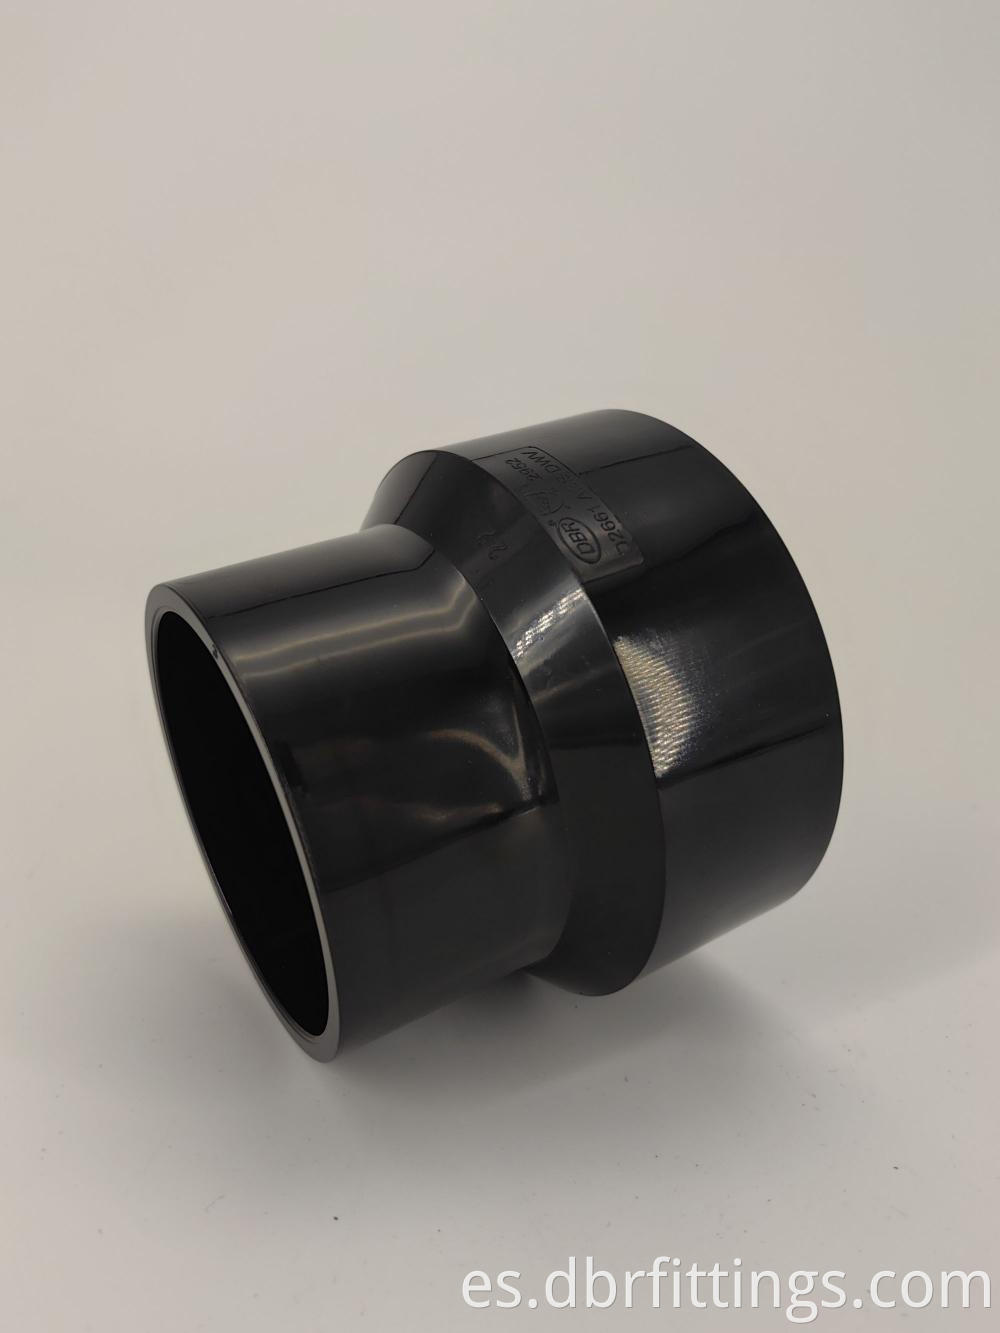 High quality ABS fittings PIPE INCREASER and REDUCER